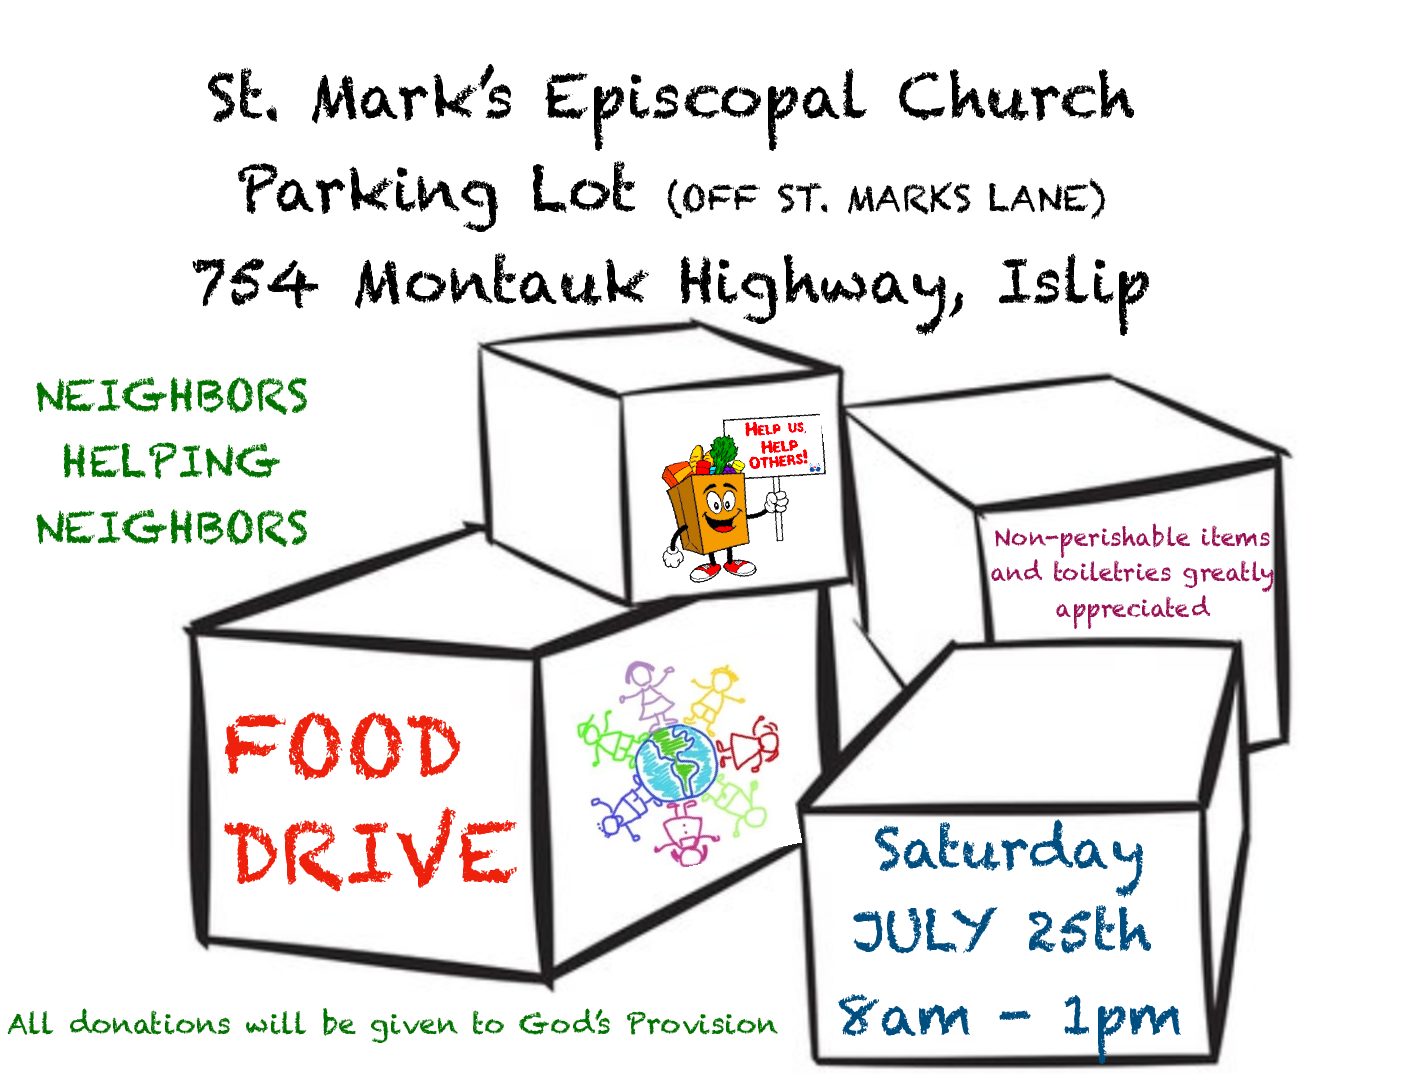 St. Mark’s Episcopal Church in Islip to Hold “Seeds of Hope” Drive-By Food Drop